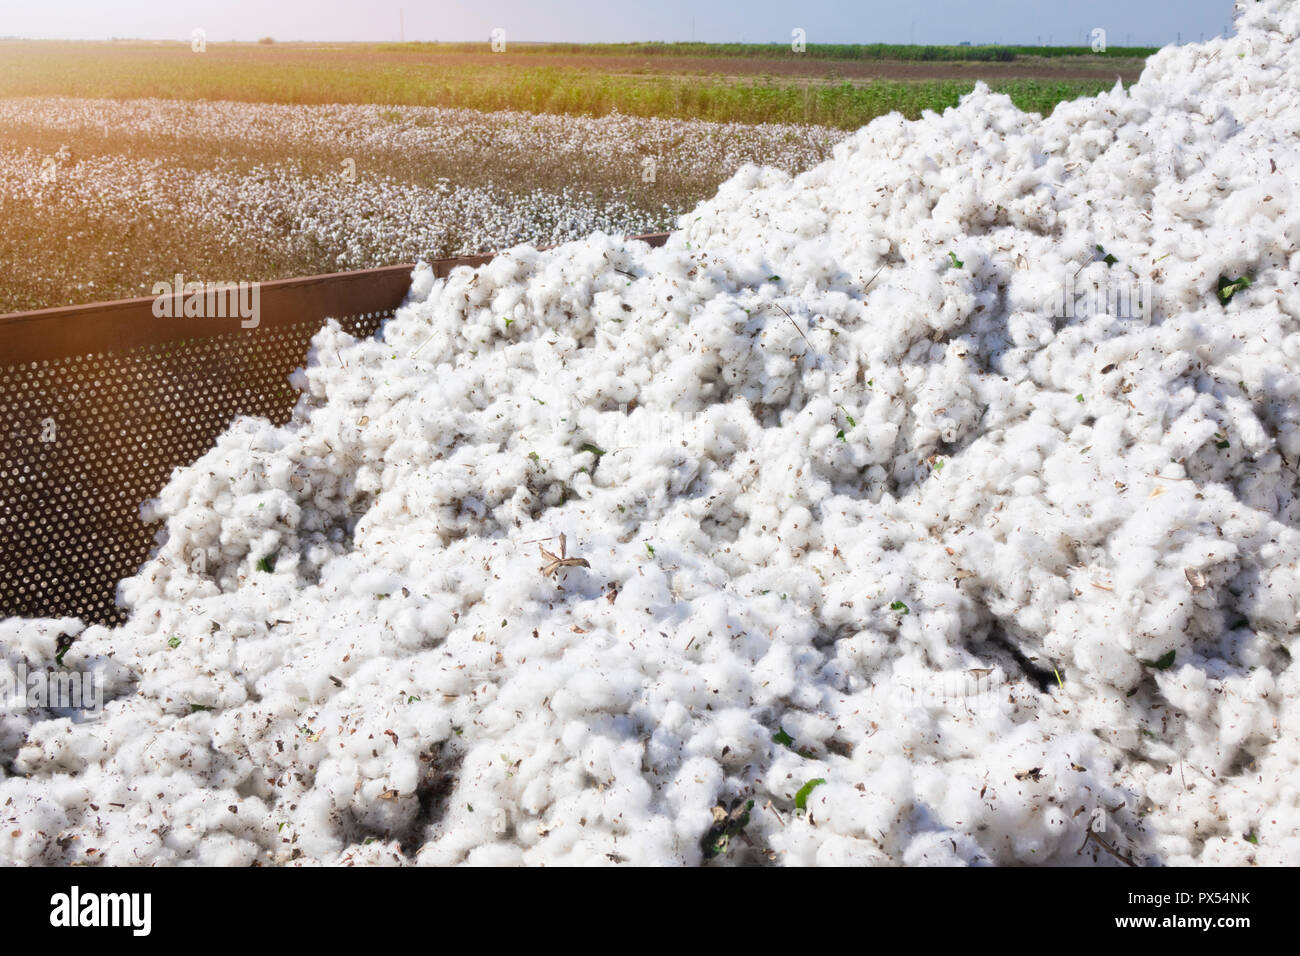 Cotton harvest from field Stock Photo